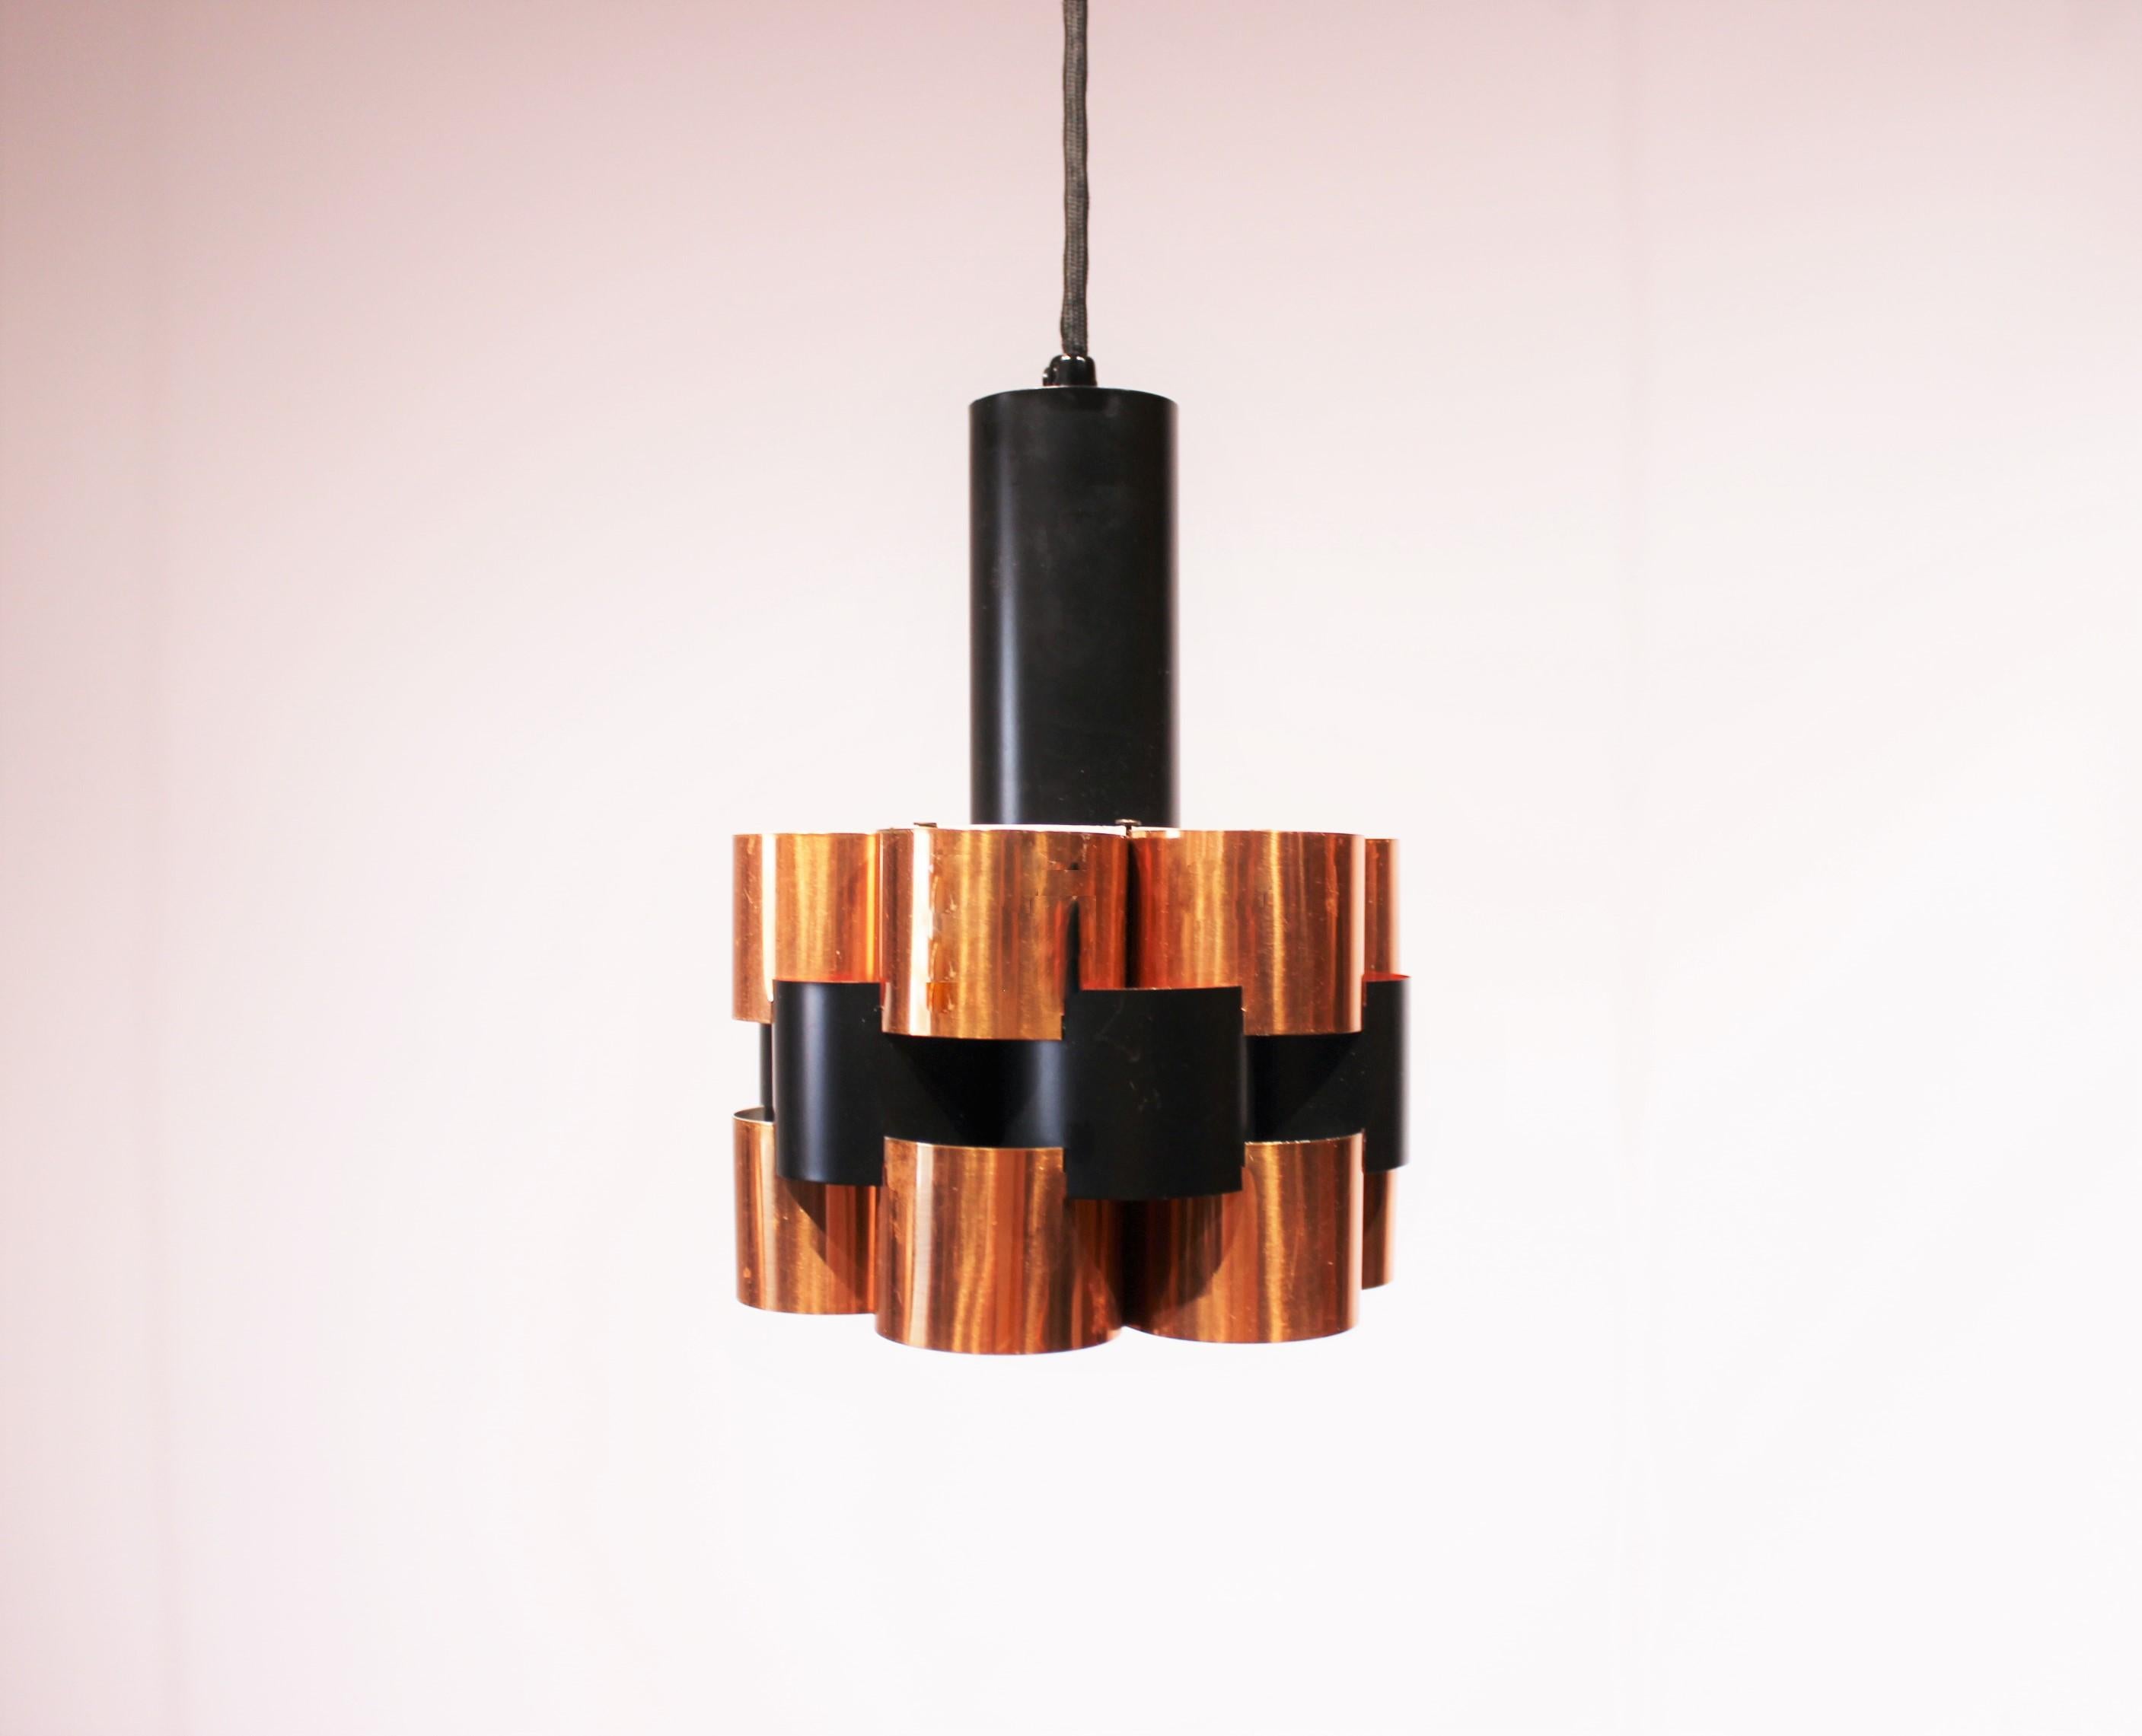 These ceiling pendants, crafted in copper and black lacquered metal, epitomize the sleek elegance of 1960s design. Designed by Werner Schou, they boast a harmonious blend of materials and colors that exude sophistication. 

The warm hue of copper